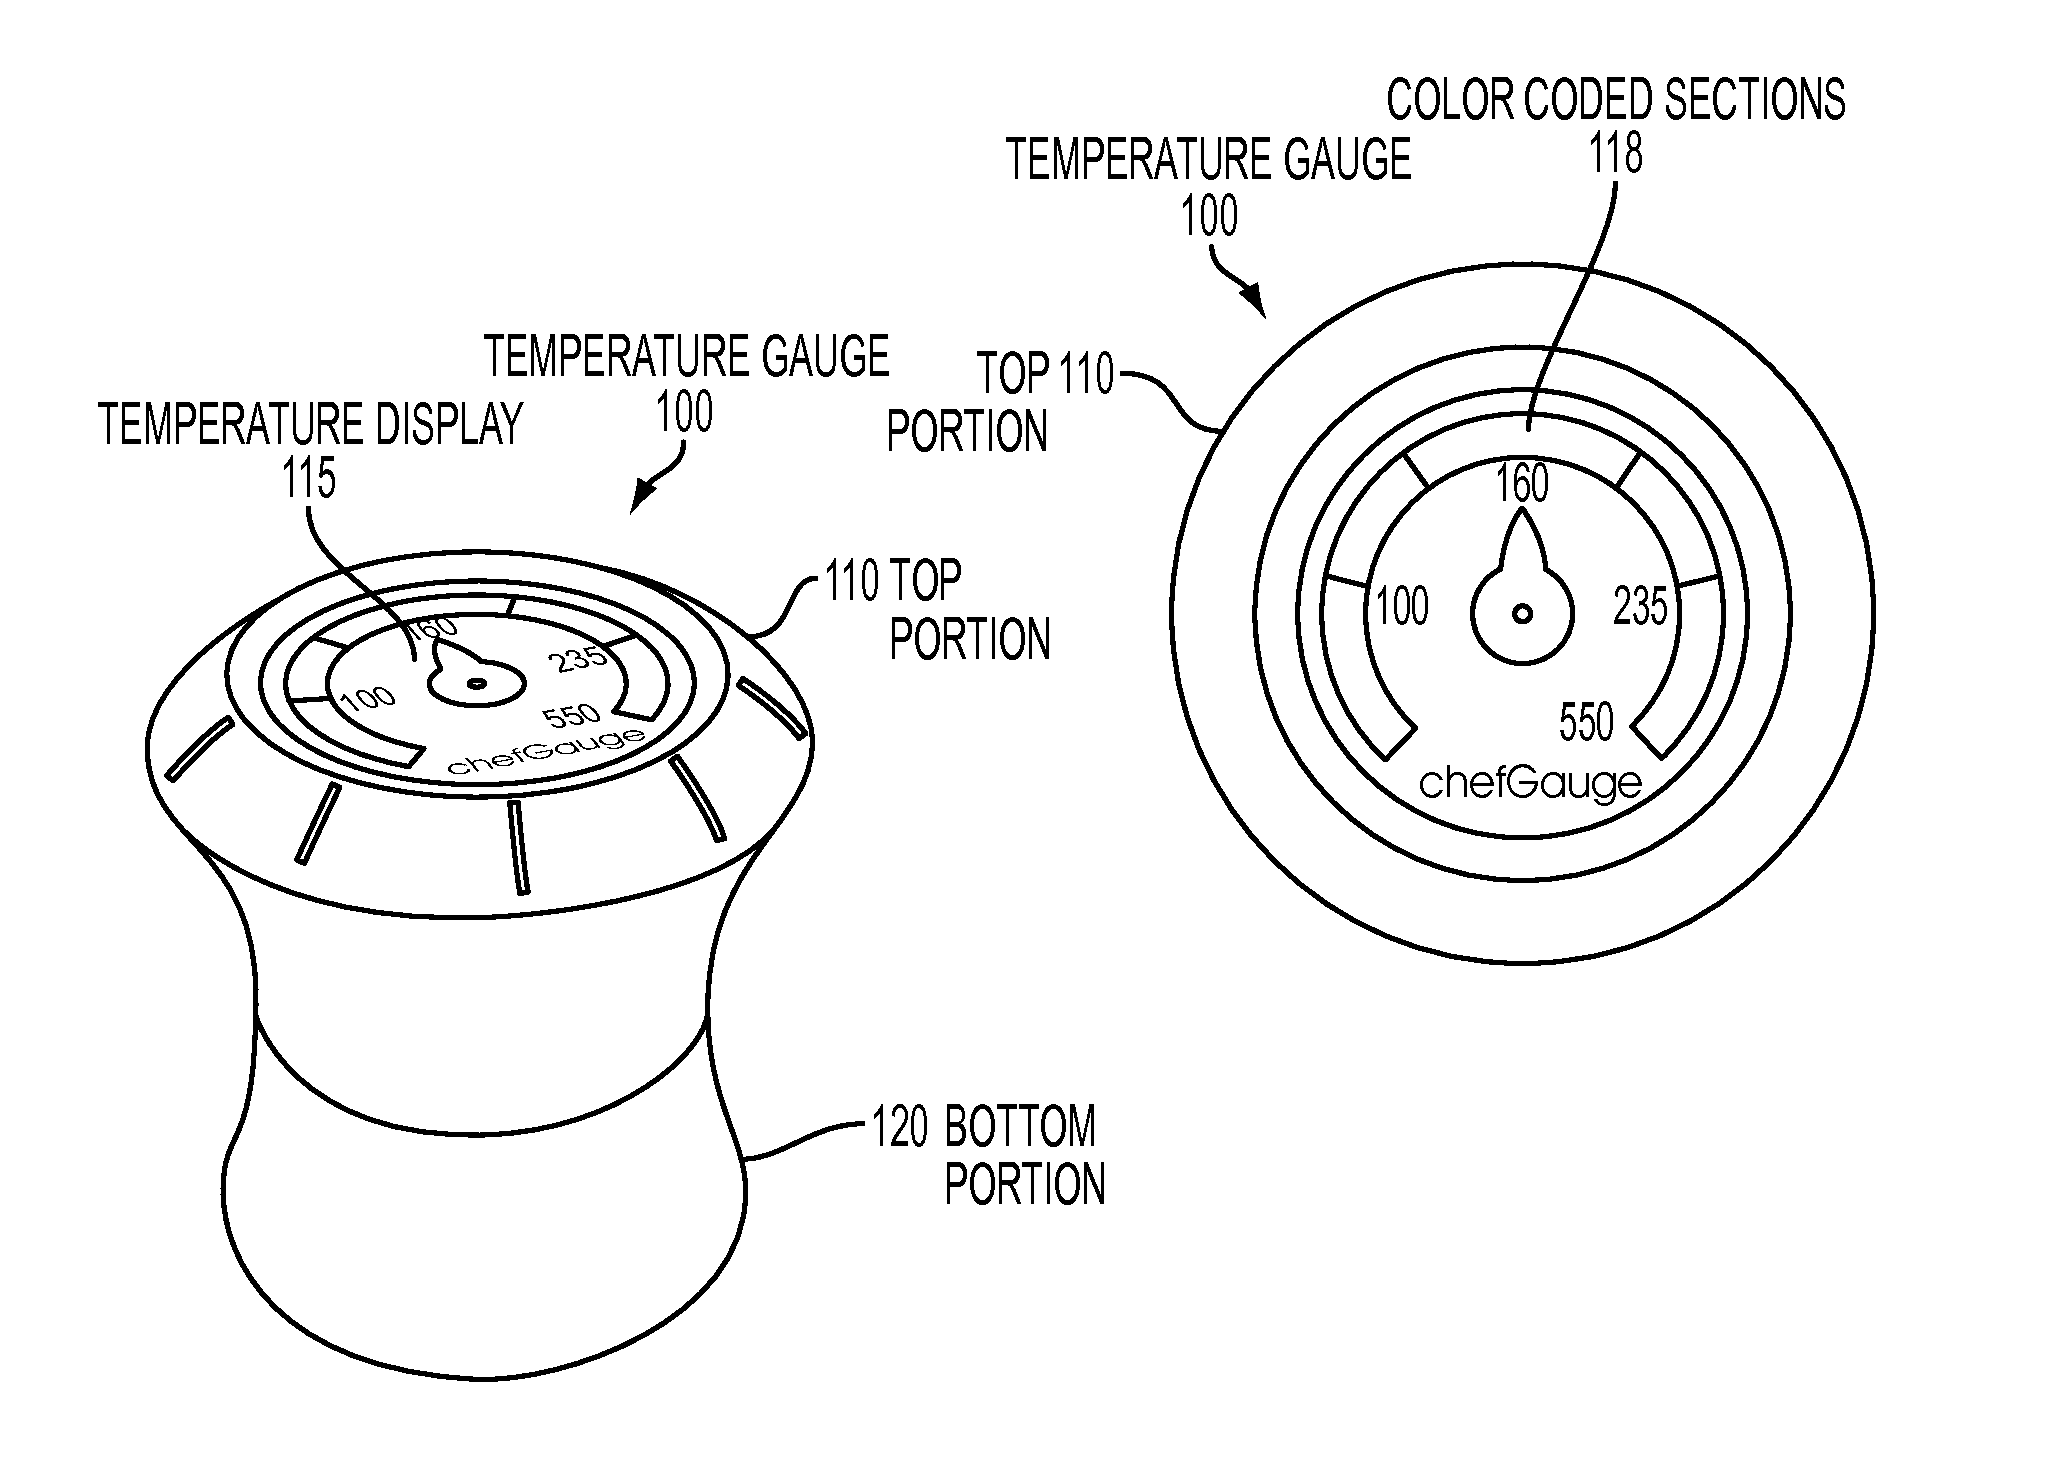 Temperature gauge for displaying the temperature of a cooking surface of cookware